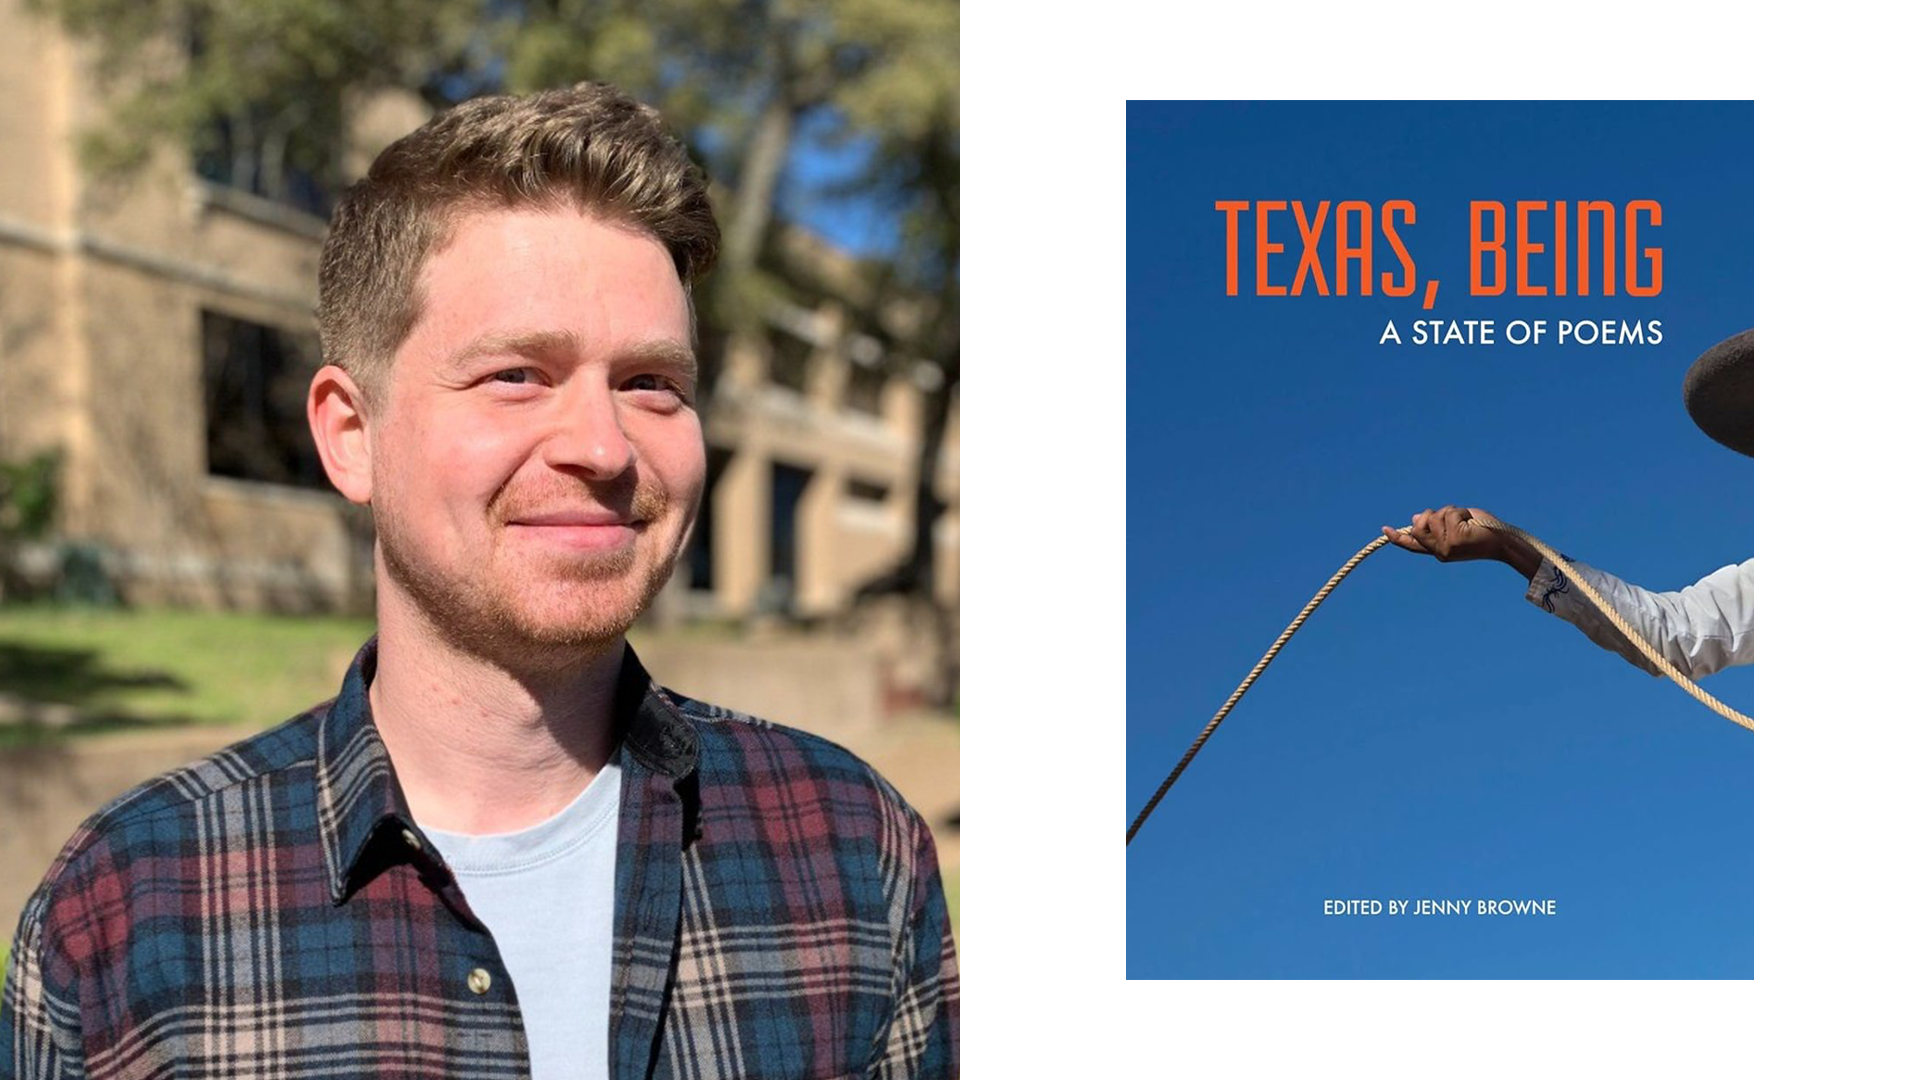 Aaron Hand and the cover of "Texas: A State of Being" book